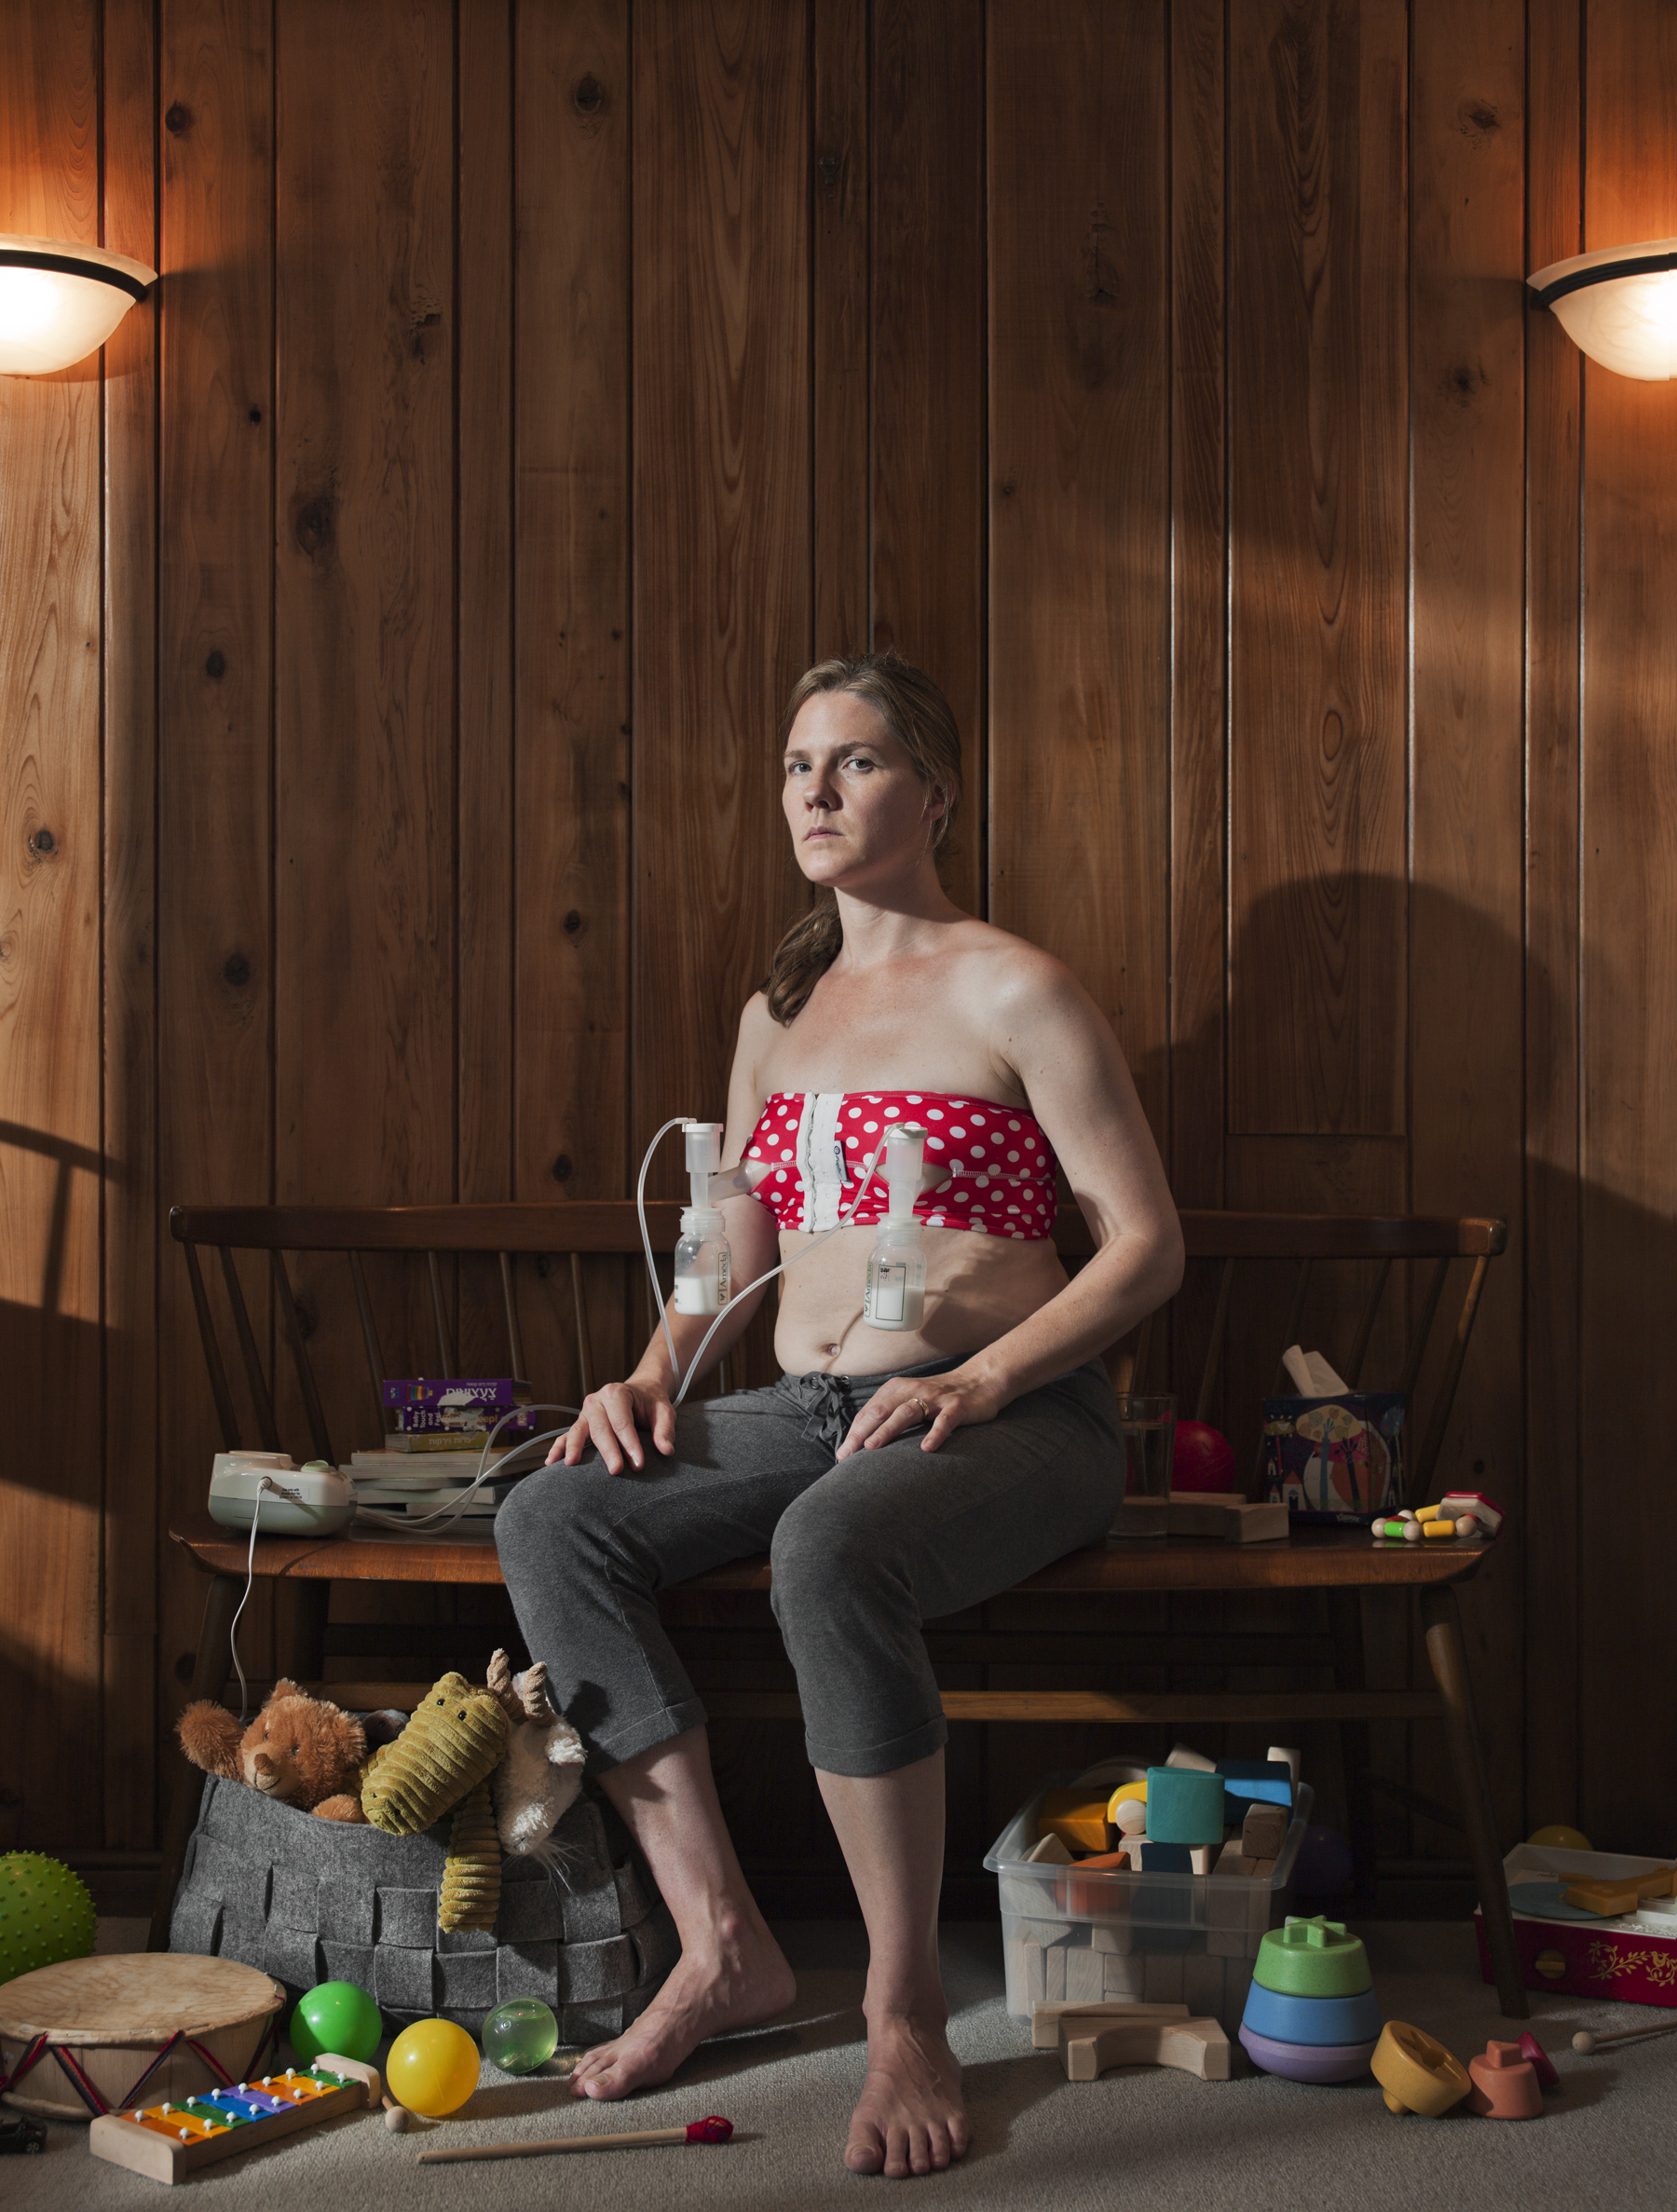 Self-Portrait With Breast Pump, 2013